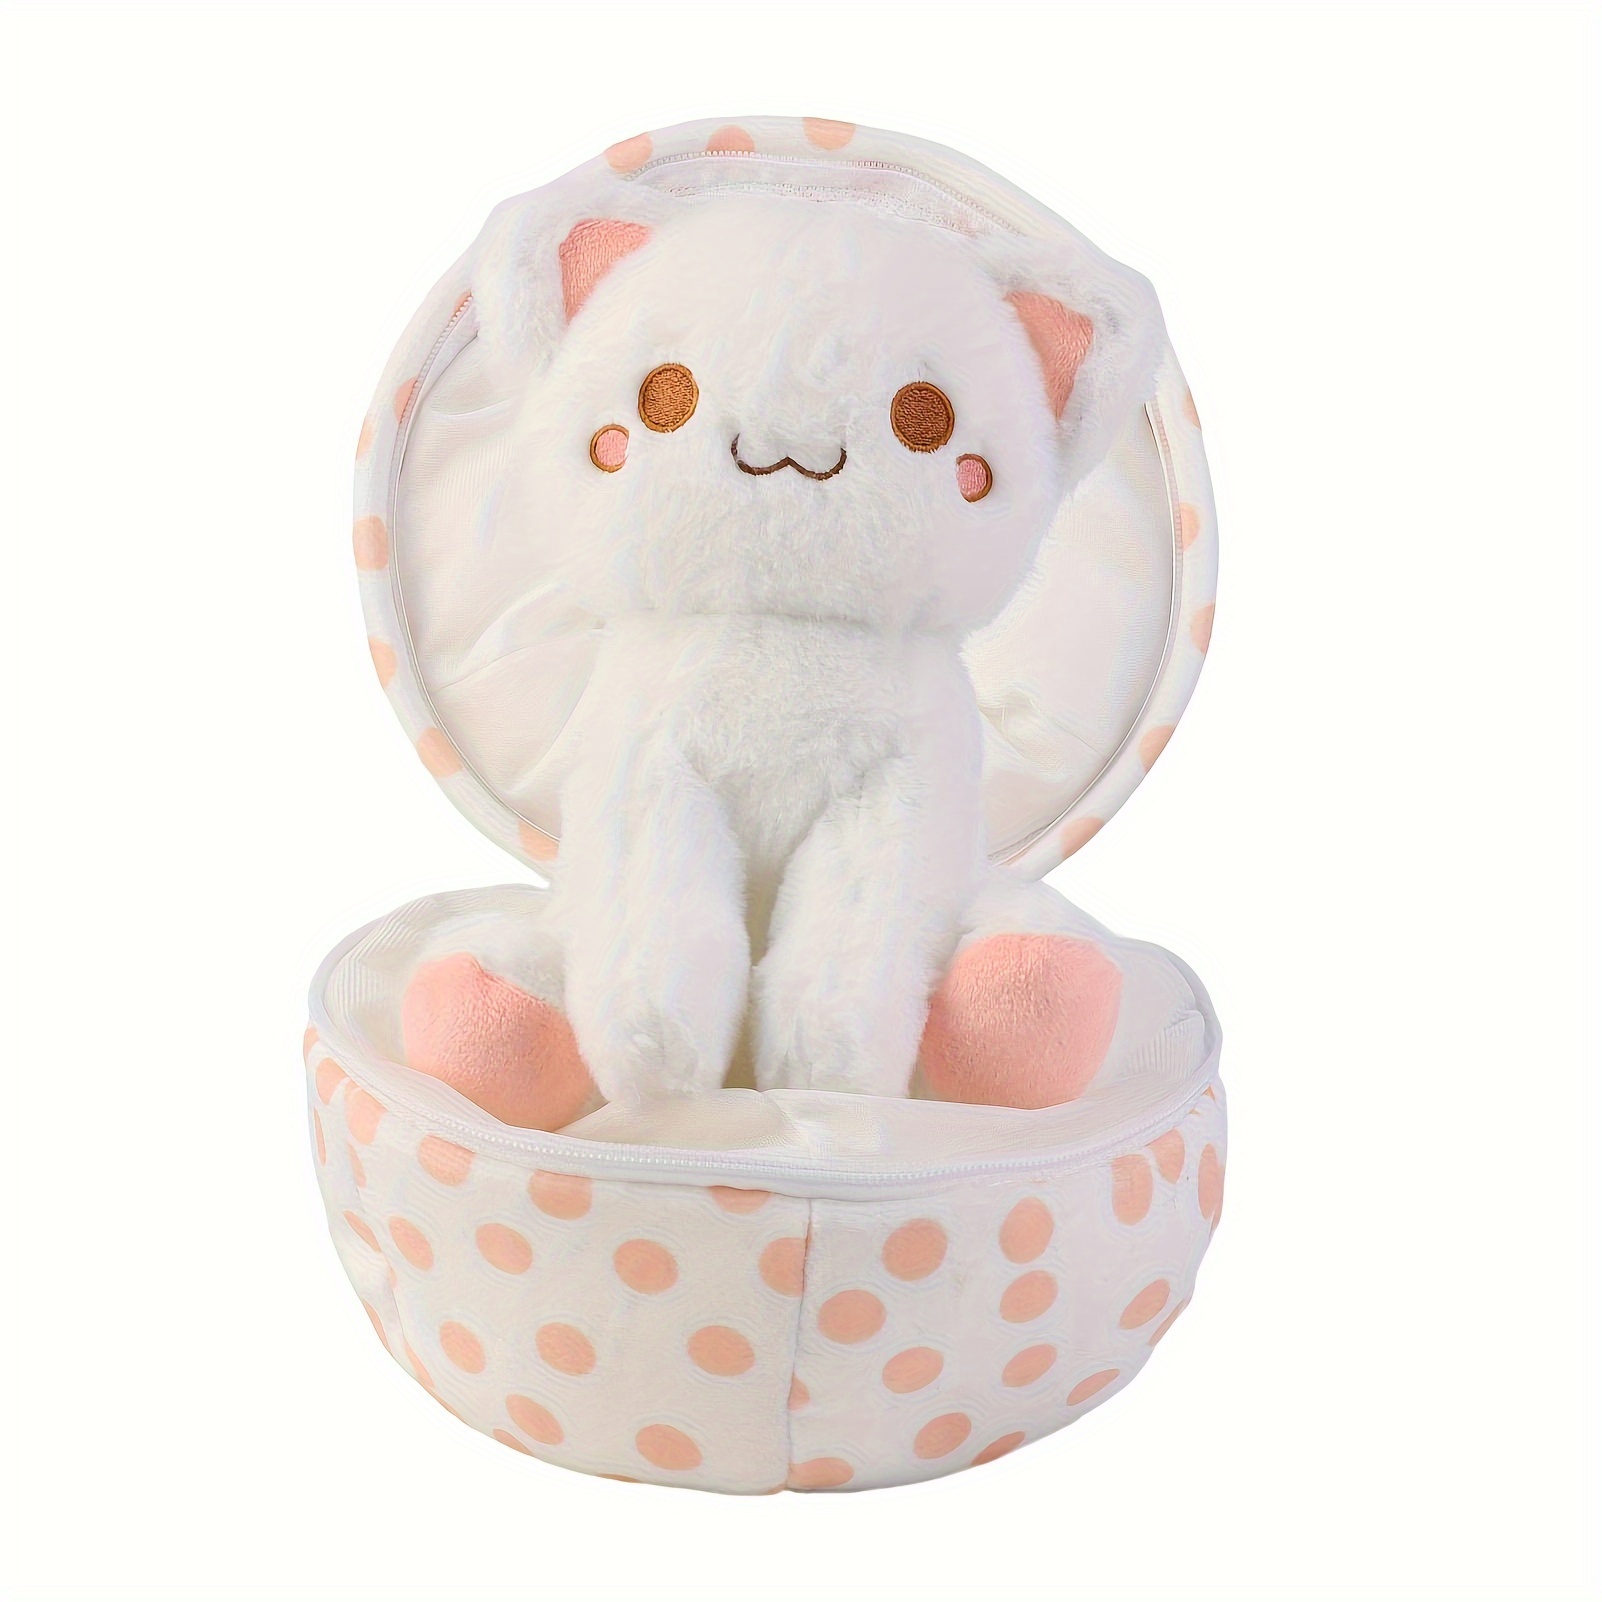 

2 In 1 Kawaii Cat Plush Toys Cat Egg Plush Easter Plush Hugging Sleeping Doll Ultra-soft Lovable Companion Animal-themed Rooms Basket For Cuddling And Playing Valentine's Day Home Decor Party Gift